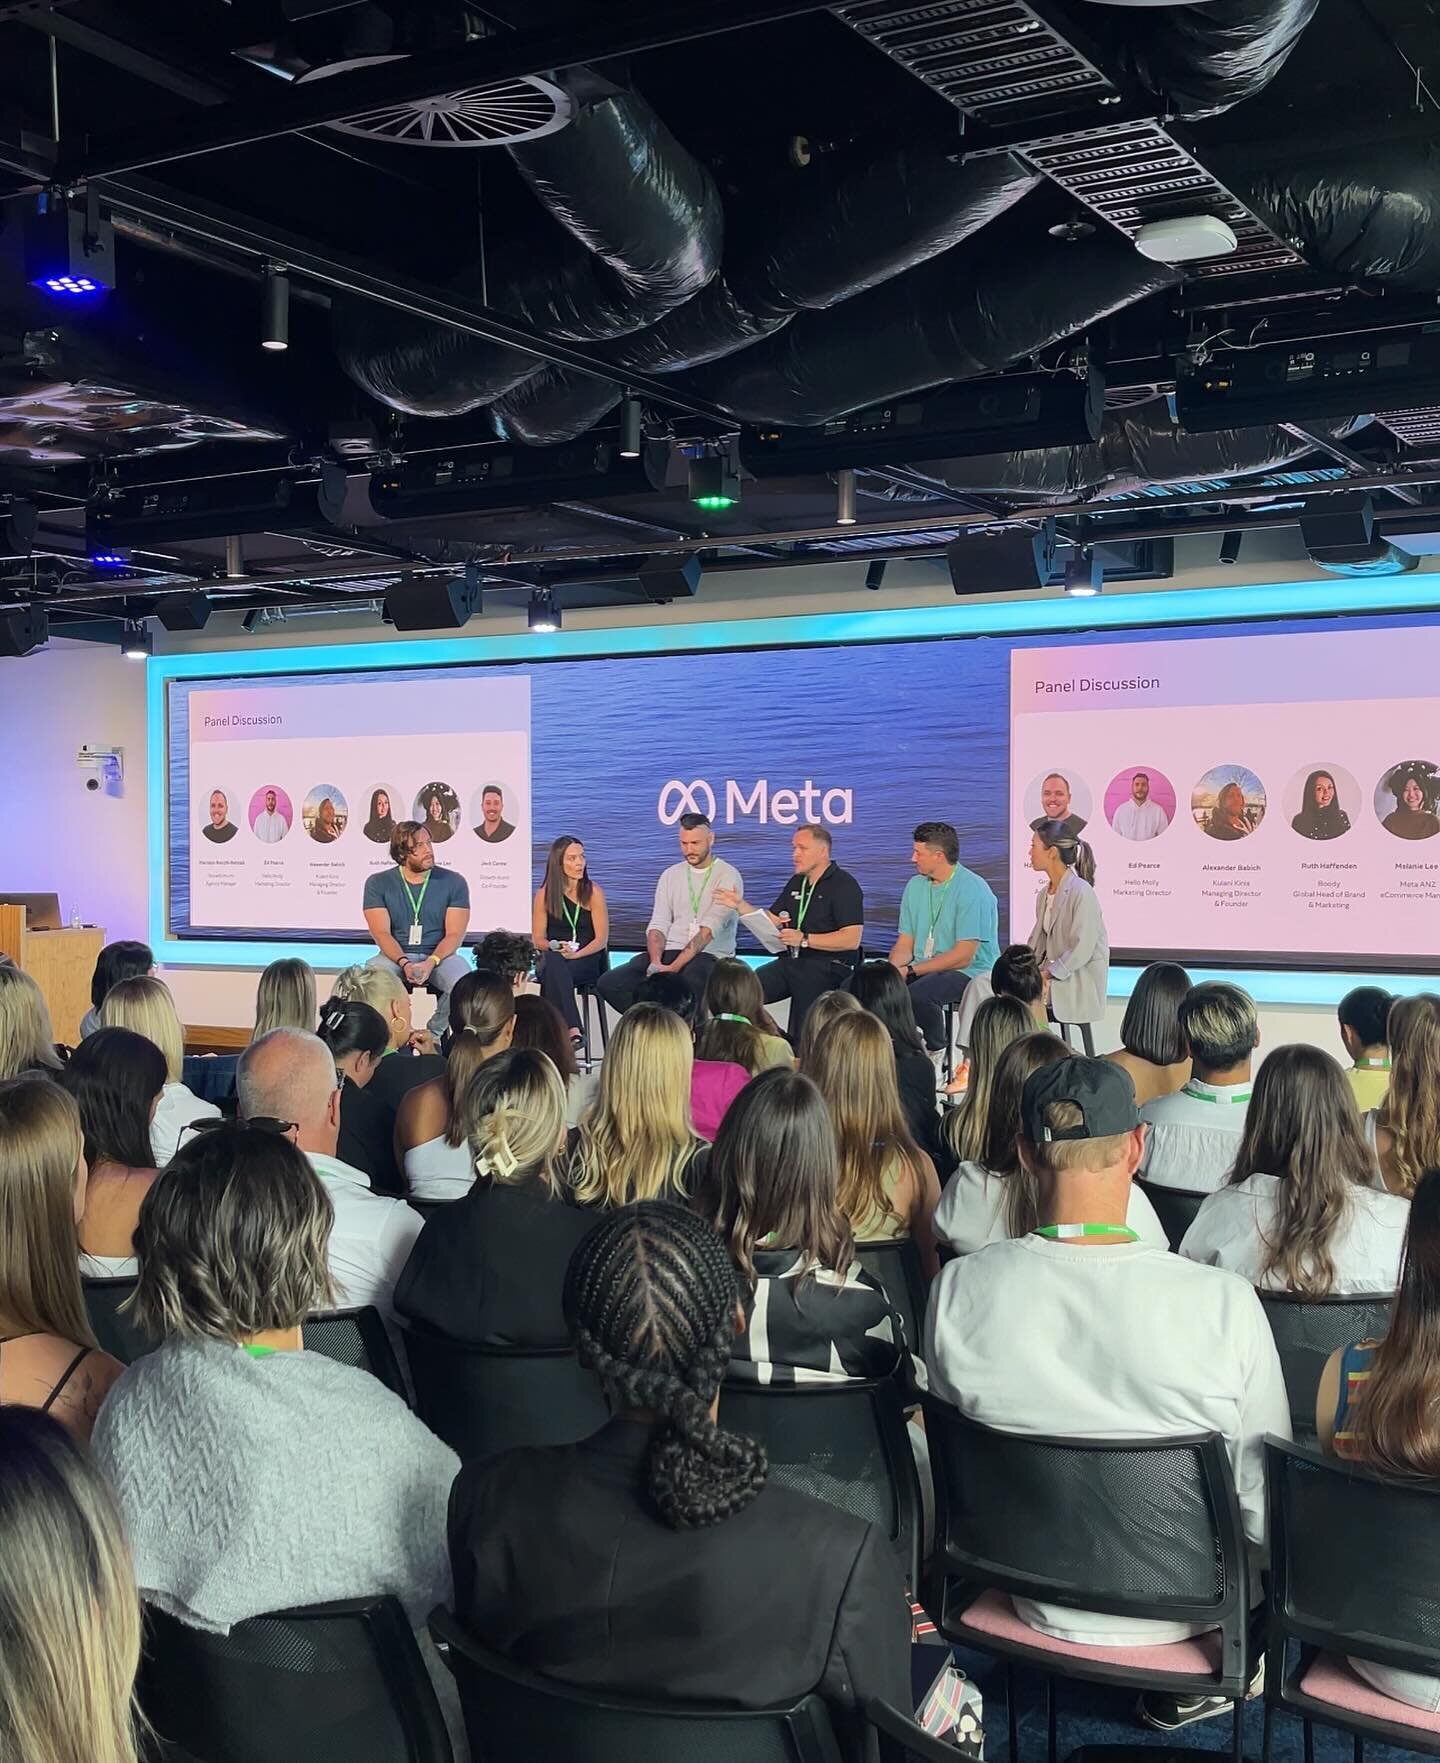 A sneak peak into what the Growth Huntr team got up to this week 👉🏼 The GH teamed collaborated with Meta to host an inspiration and education day with some of our amazing clients from @boody @hellomolly and @kulanikinis to discuss all things paid m